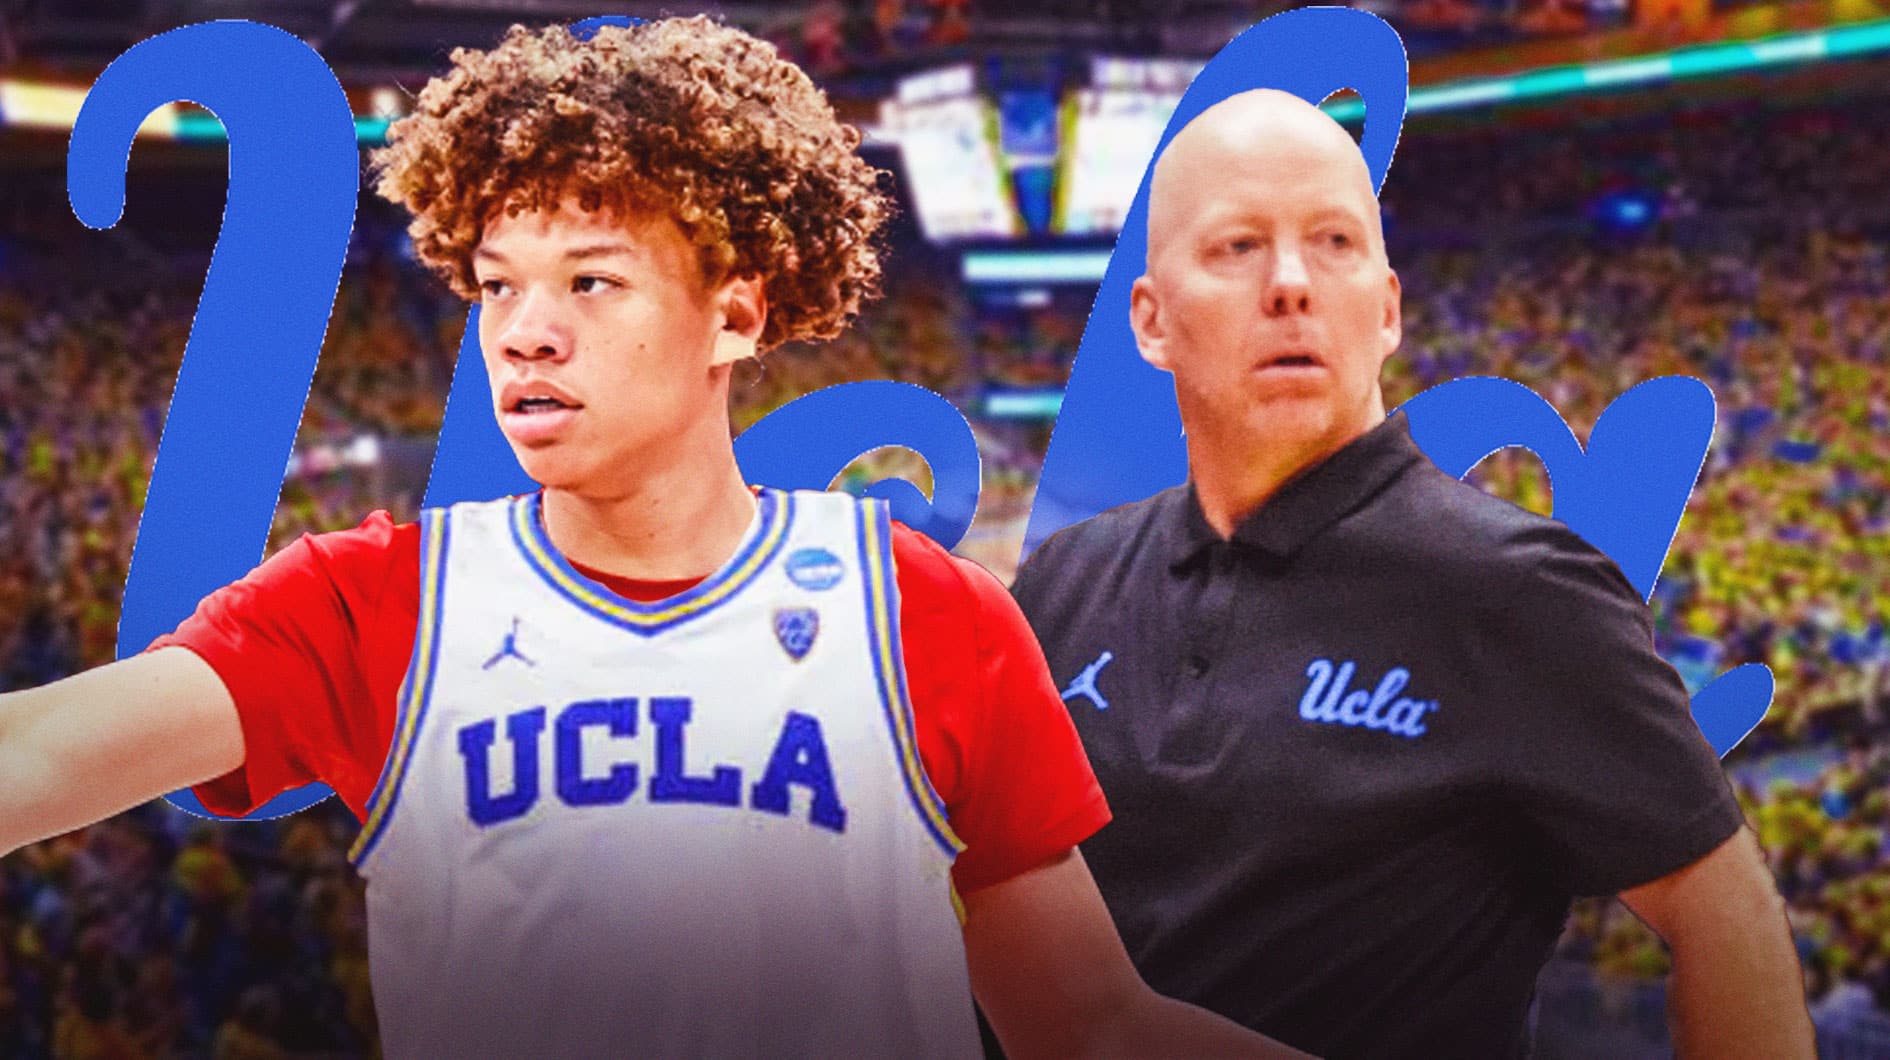 UCLA lands commitment of 4-star former USC signee in major recruitment win